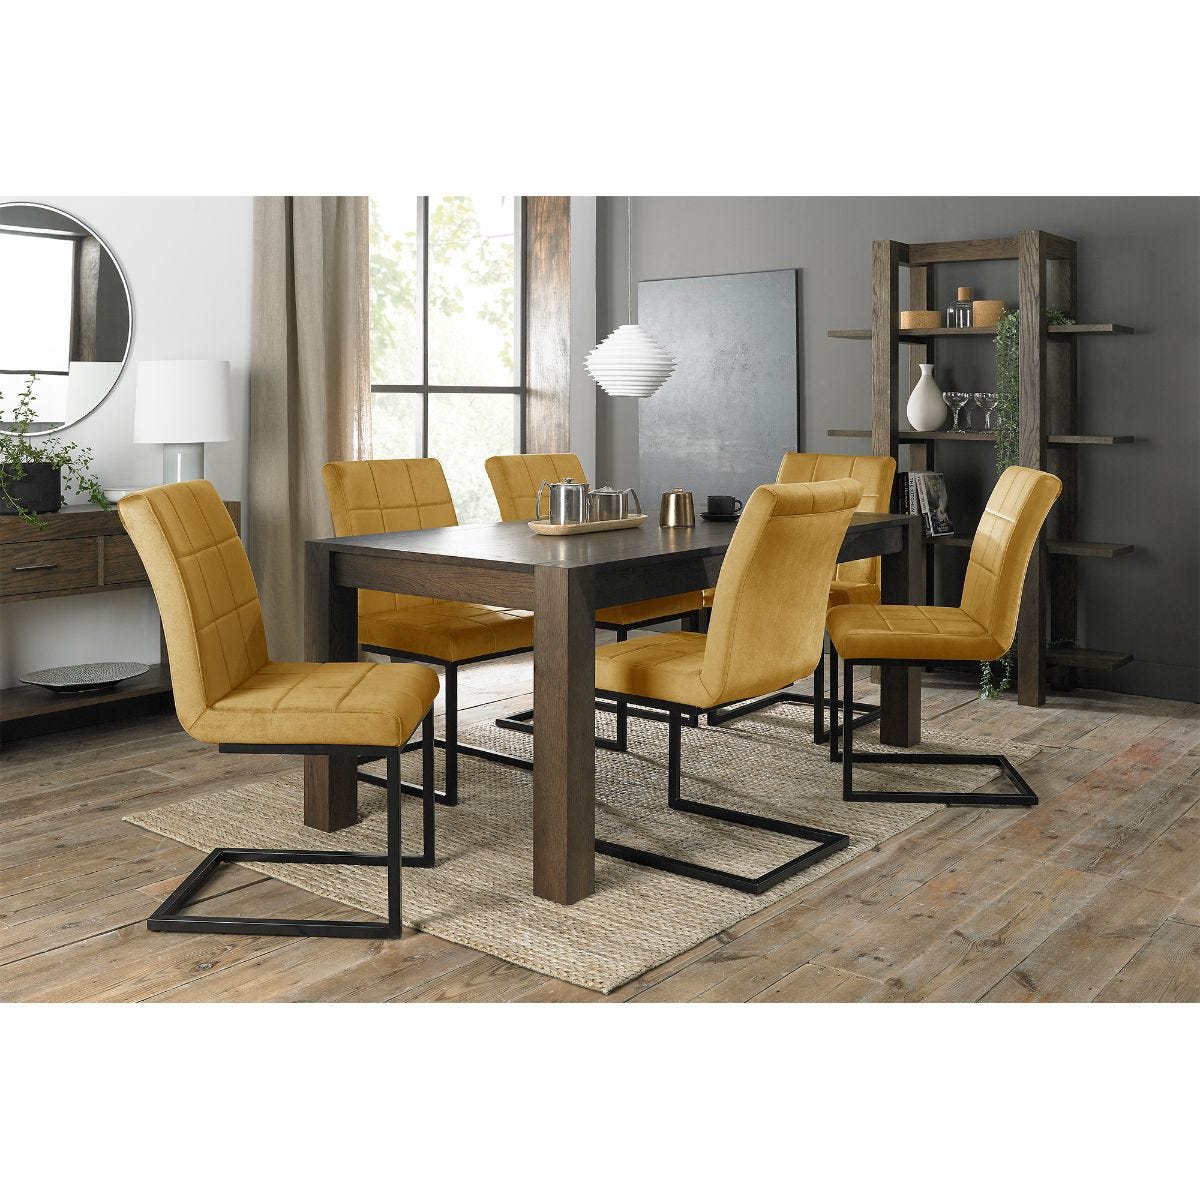 Bentley Designs Cannes Dark Oak 8-10 Seater Dining Table & 6 Lewis Cantilever Chairs In Mustard Velvet Fabric Black Frame